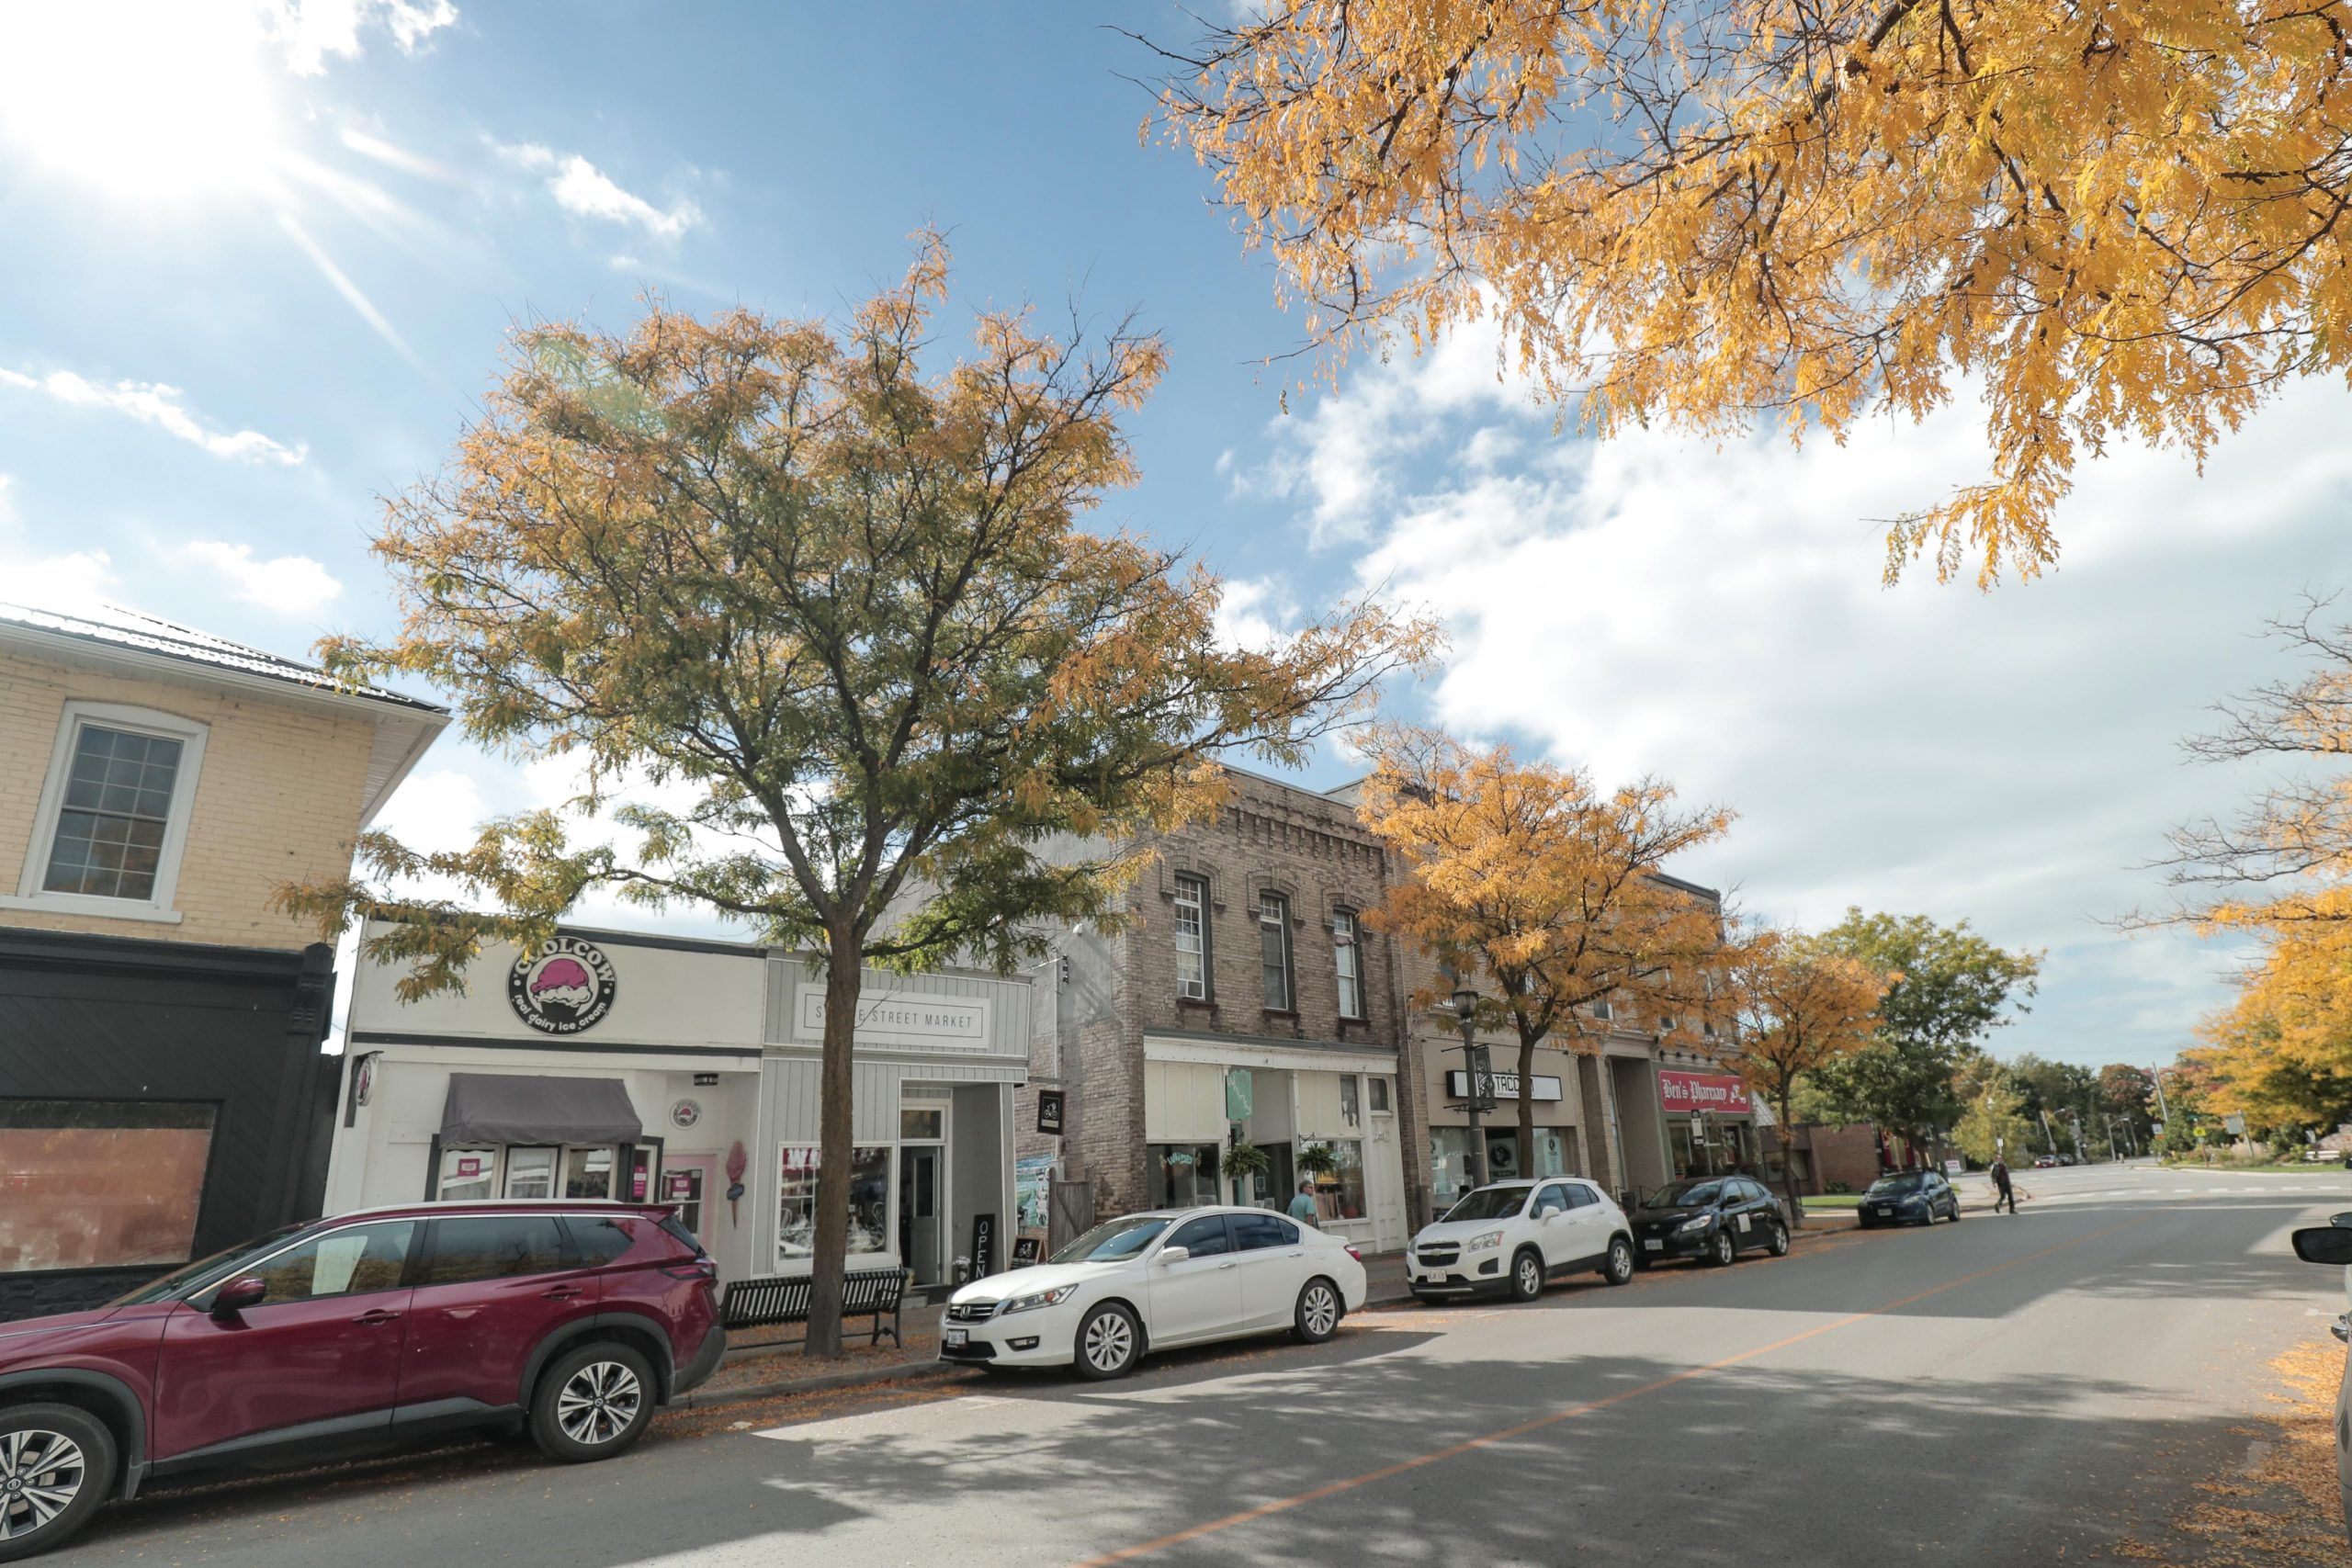 Downtown Beaverton streetscape with trees in the fall.